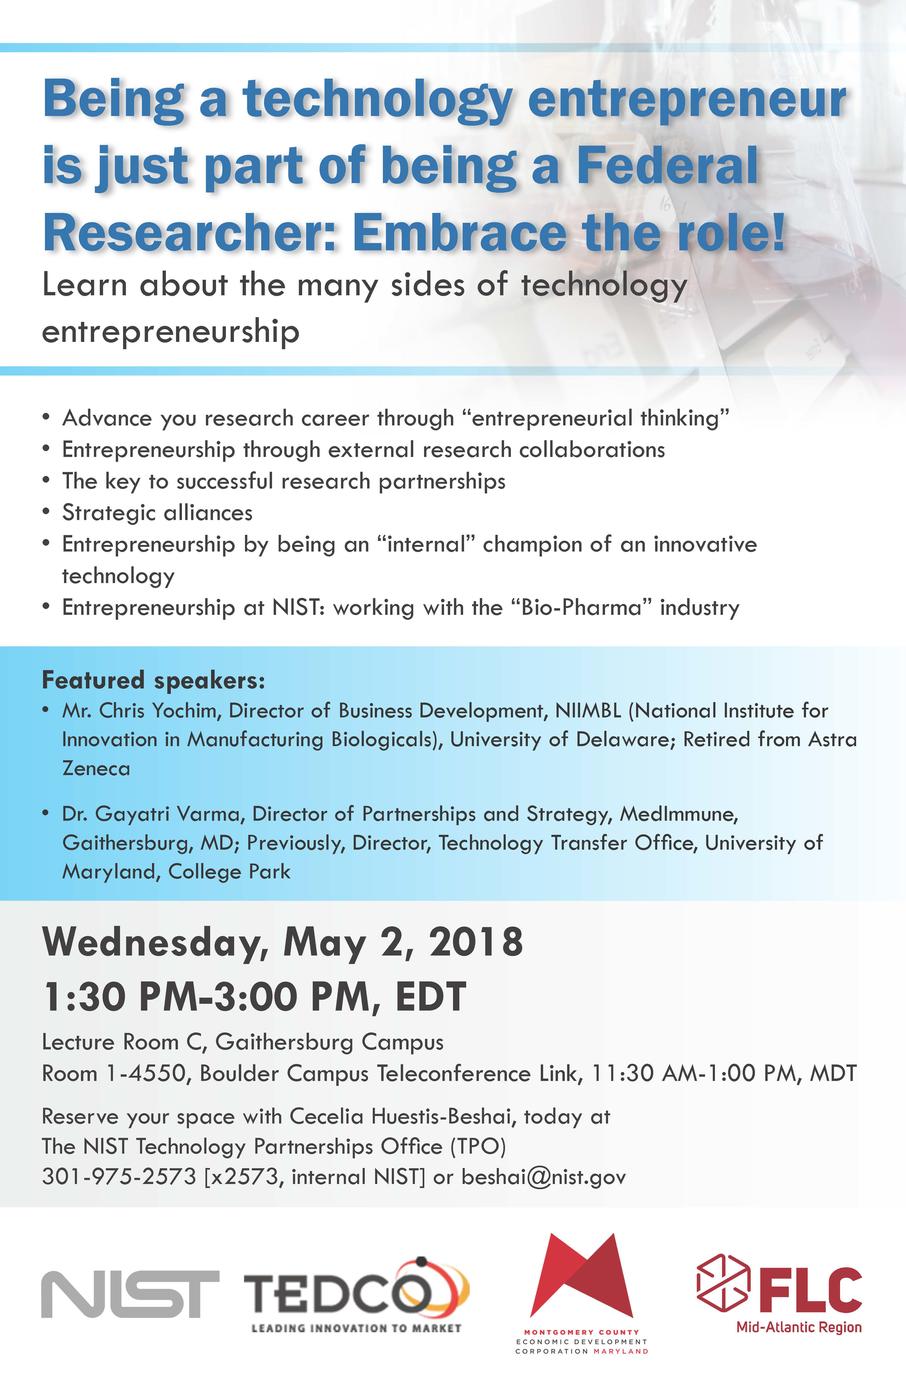 Image of seminar poster titled "Being a technology entrepreneur is just part of being a Federal Researcher: Embrace the role!"